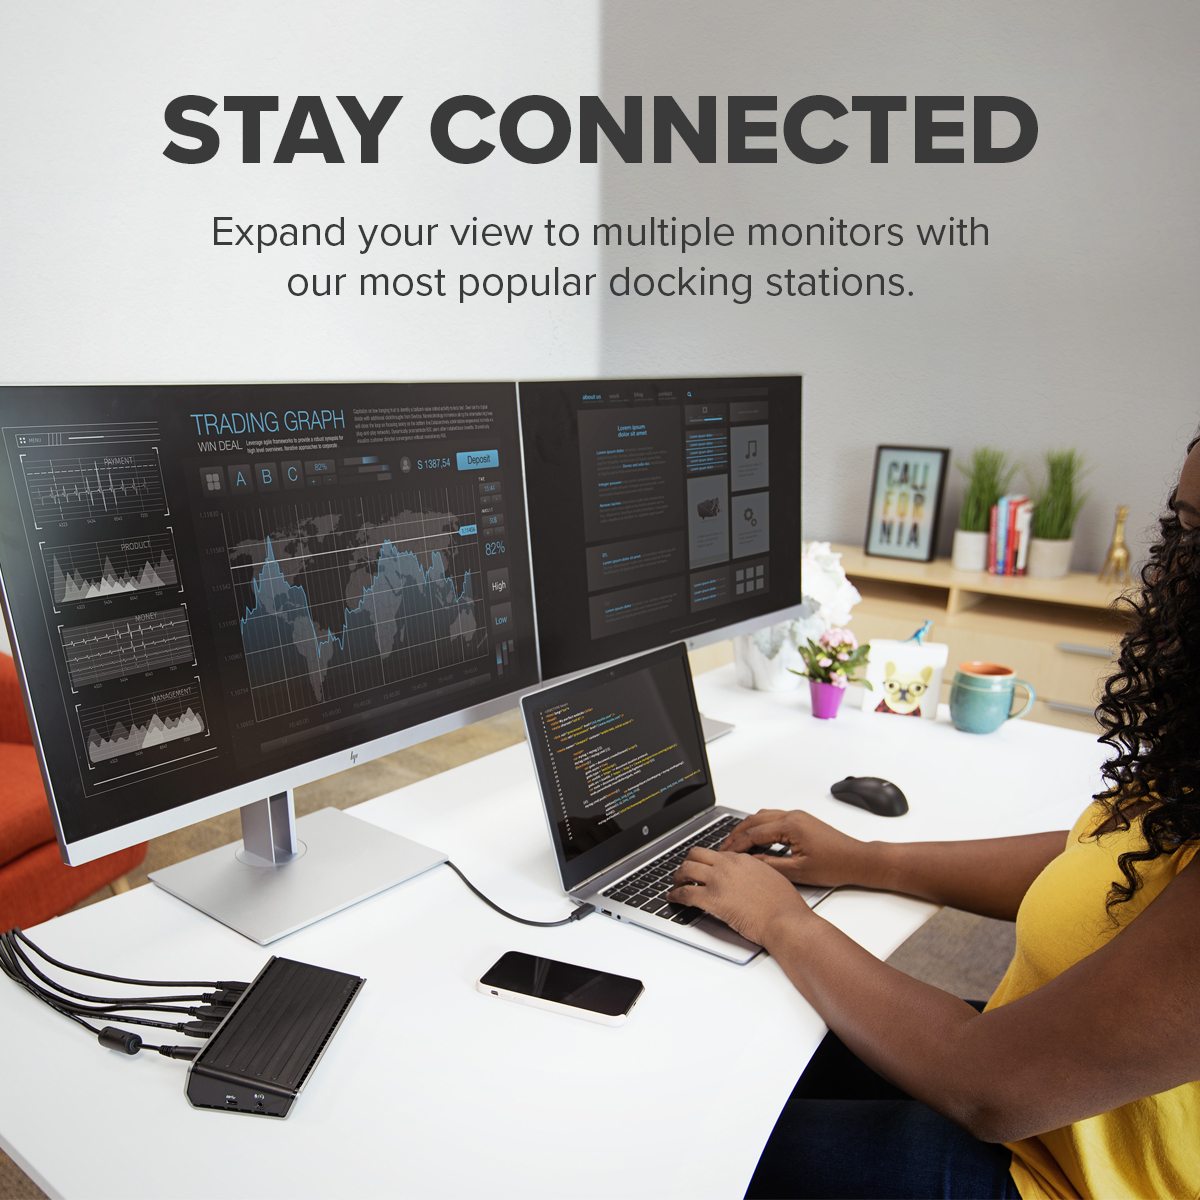 Stay Connected | Expand your view to multiple monitors with our most popular docking stations.